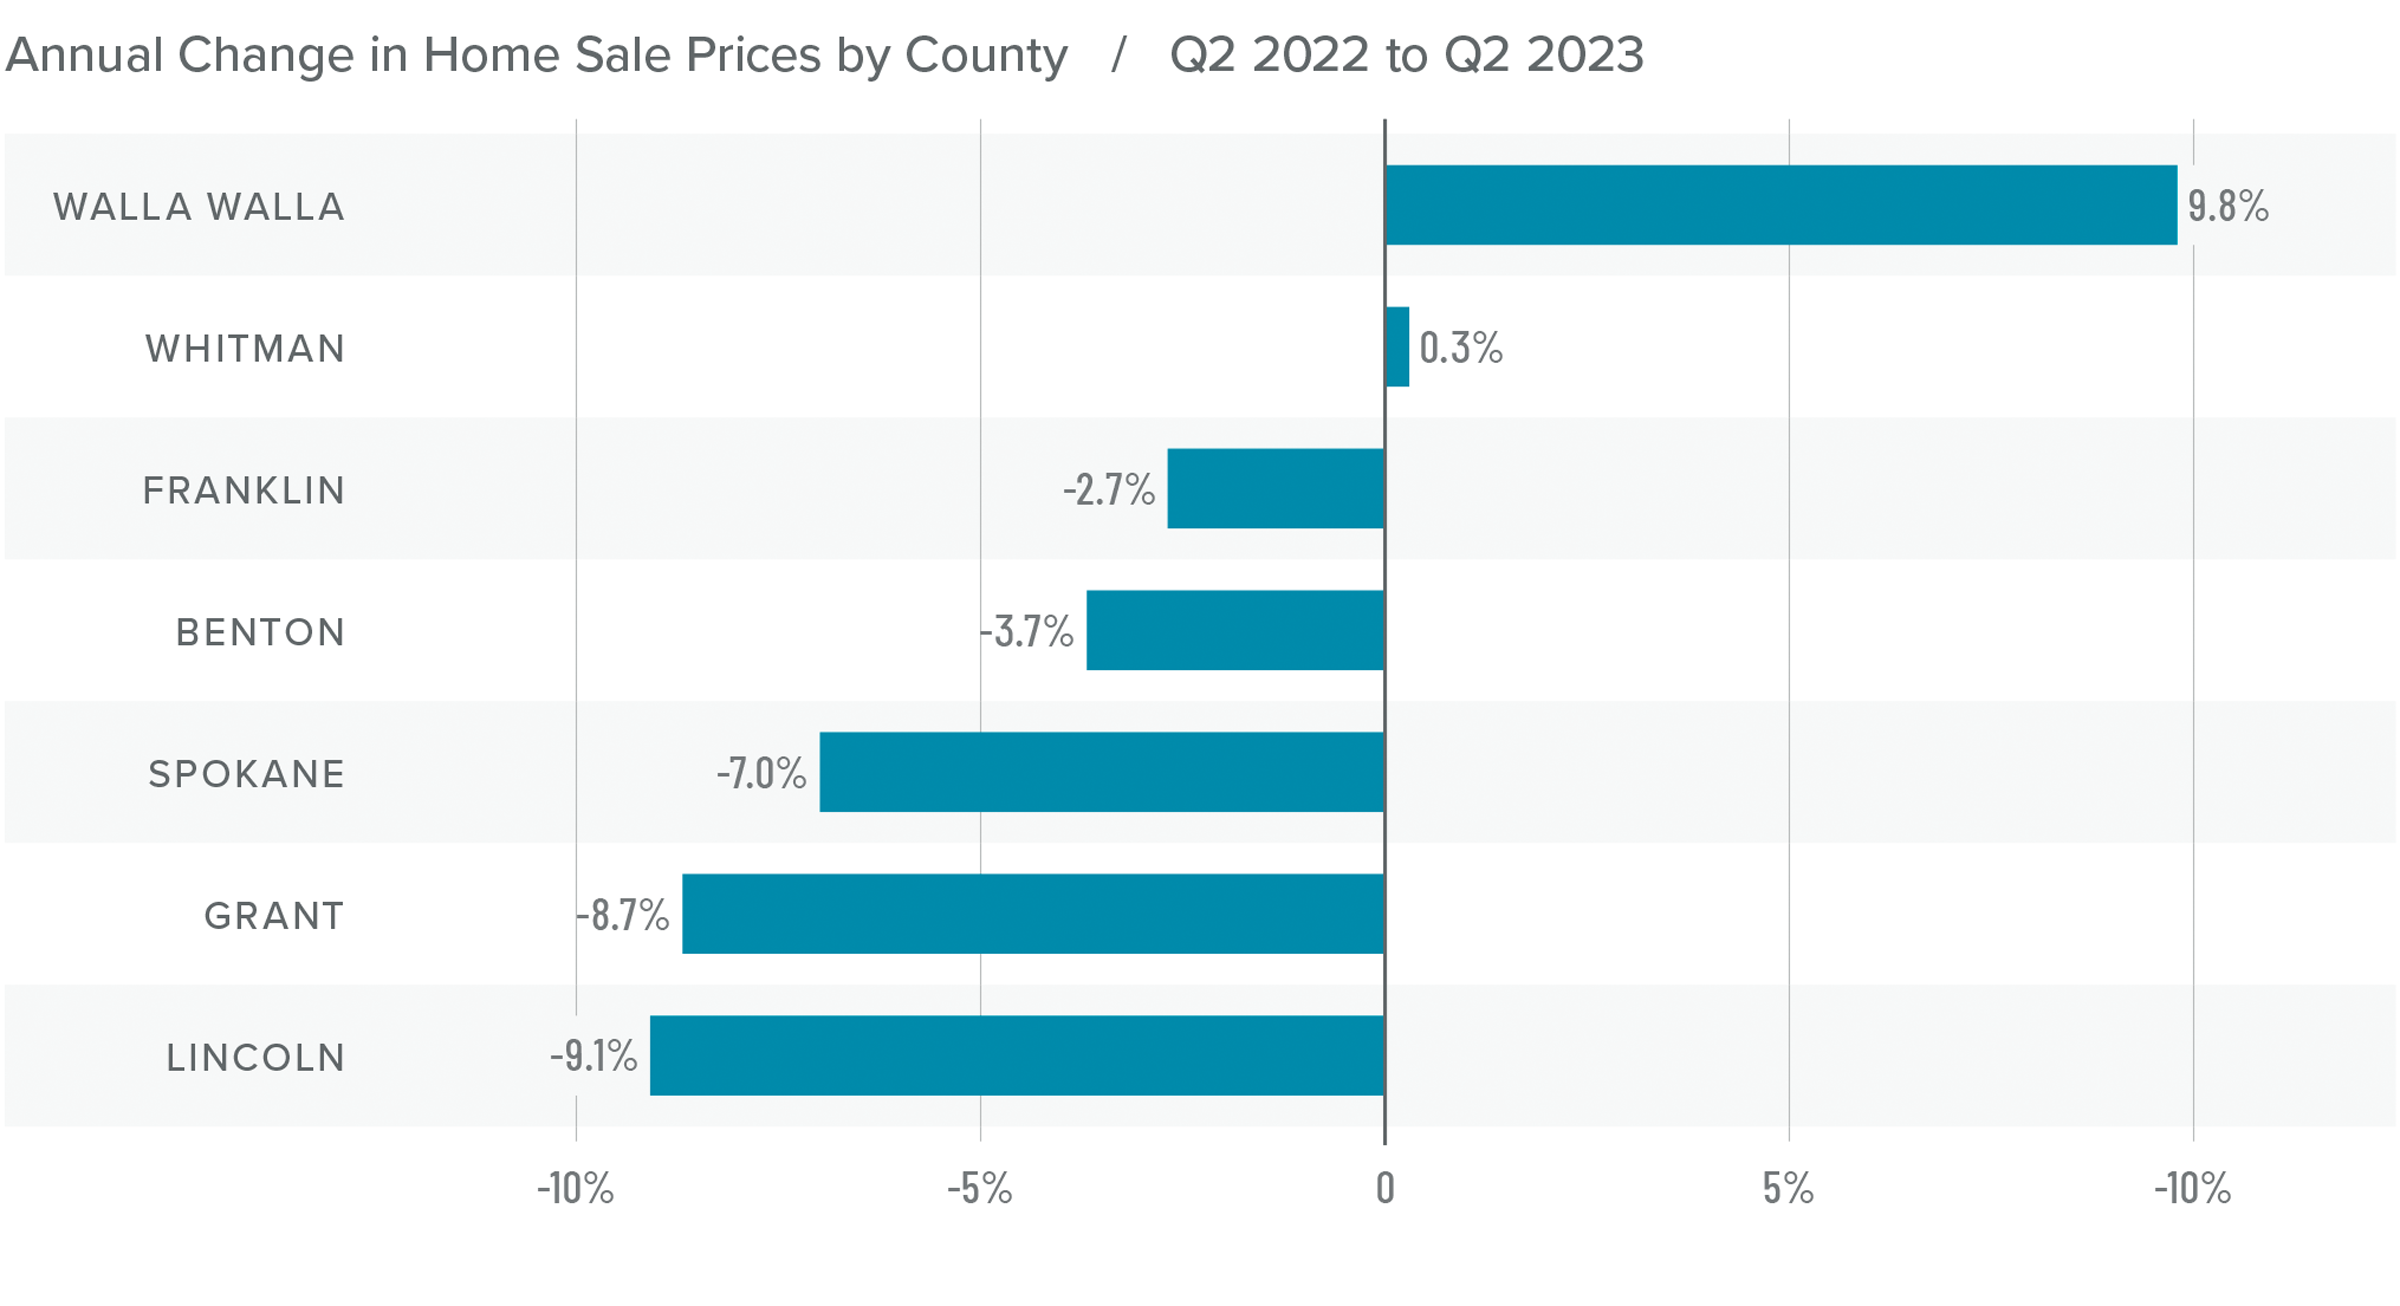 A bar graph showing the annual change in home sale prices by county in Eastern Washington from Q2 2022 to Q2 2023. Walla Walla County tops the list at 9.8%, while Lincoln County had the greatest decline at -9.1%. Benton and Spokane Counties are toward the middle at around -5%.